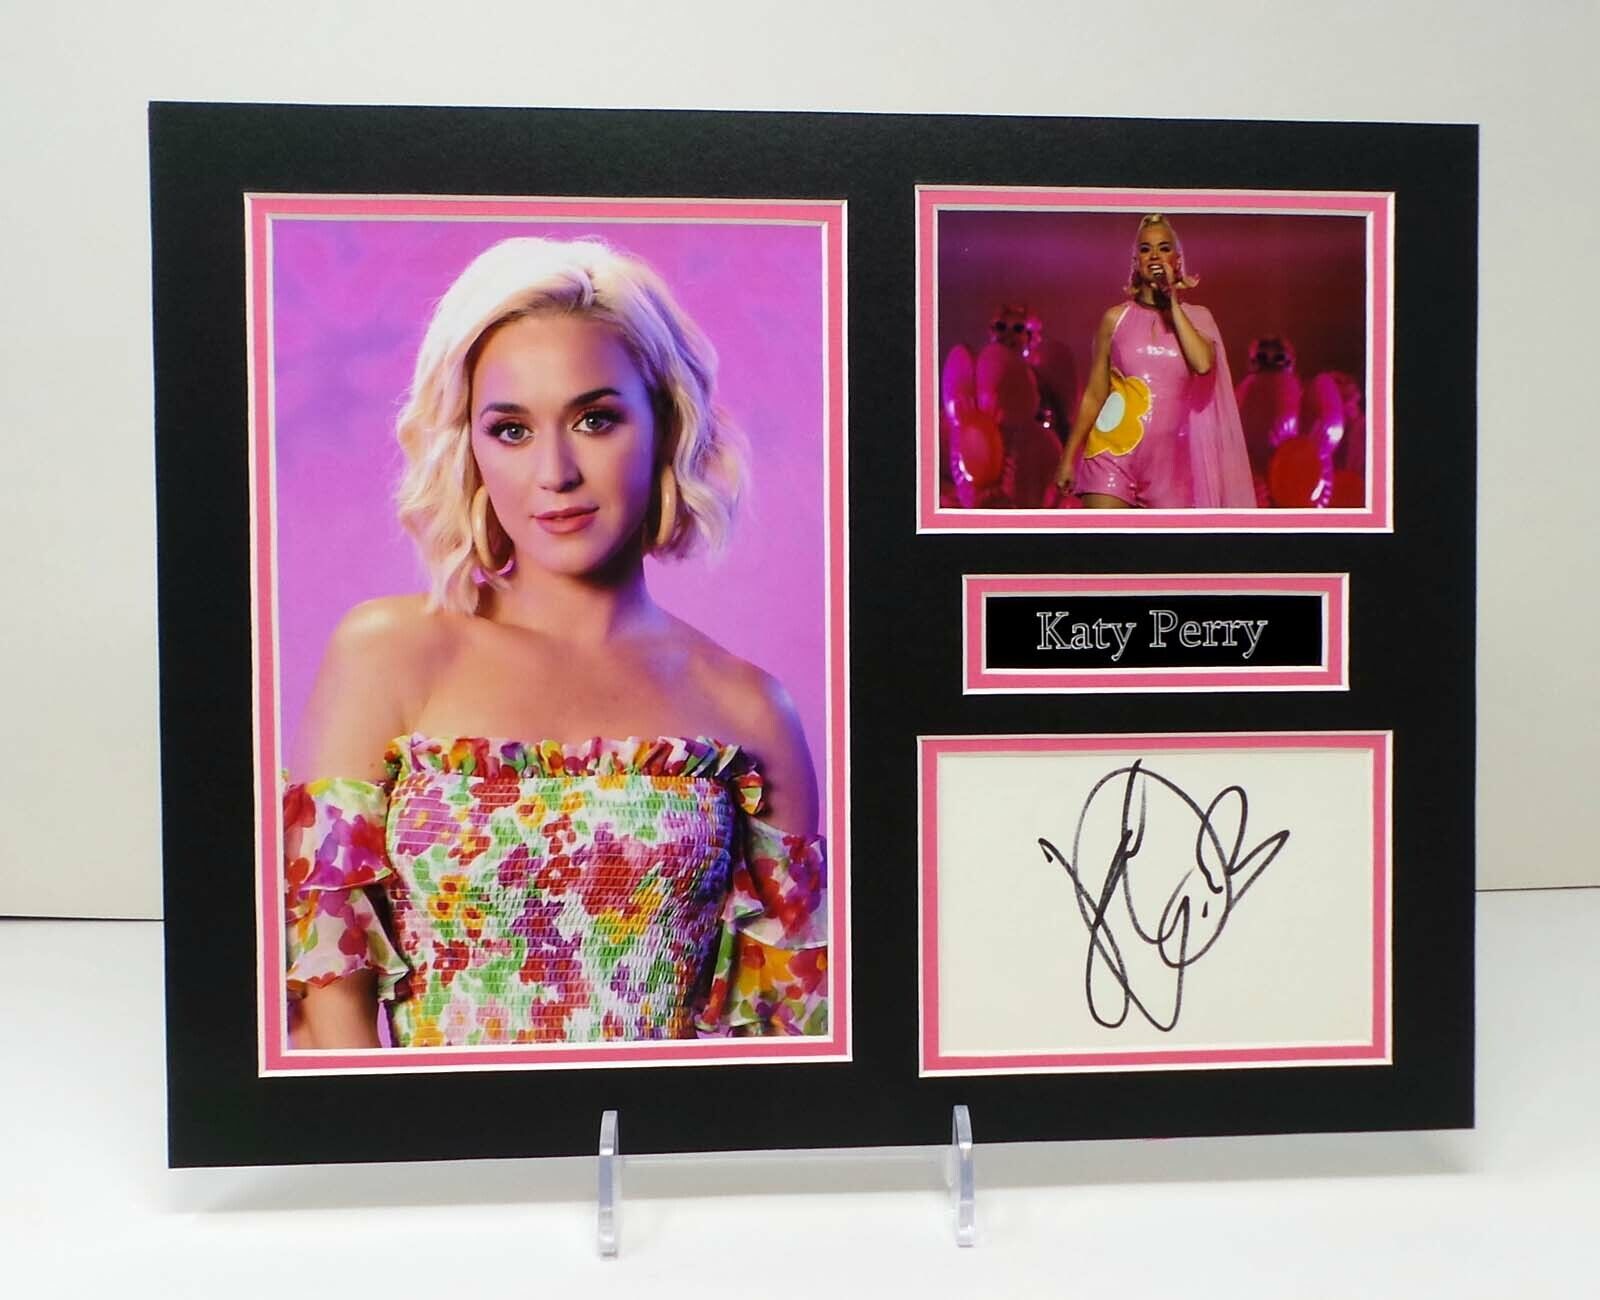 Katy PERRY Signed Mounted Photo Poster painting Display AFTAL RD COA American Singer Songwriter